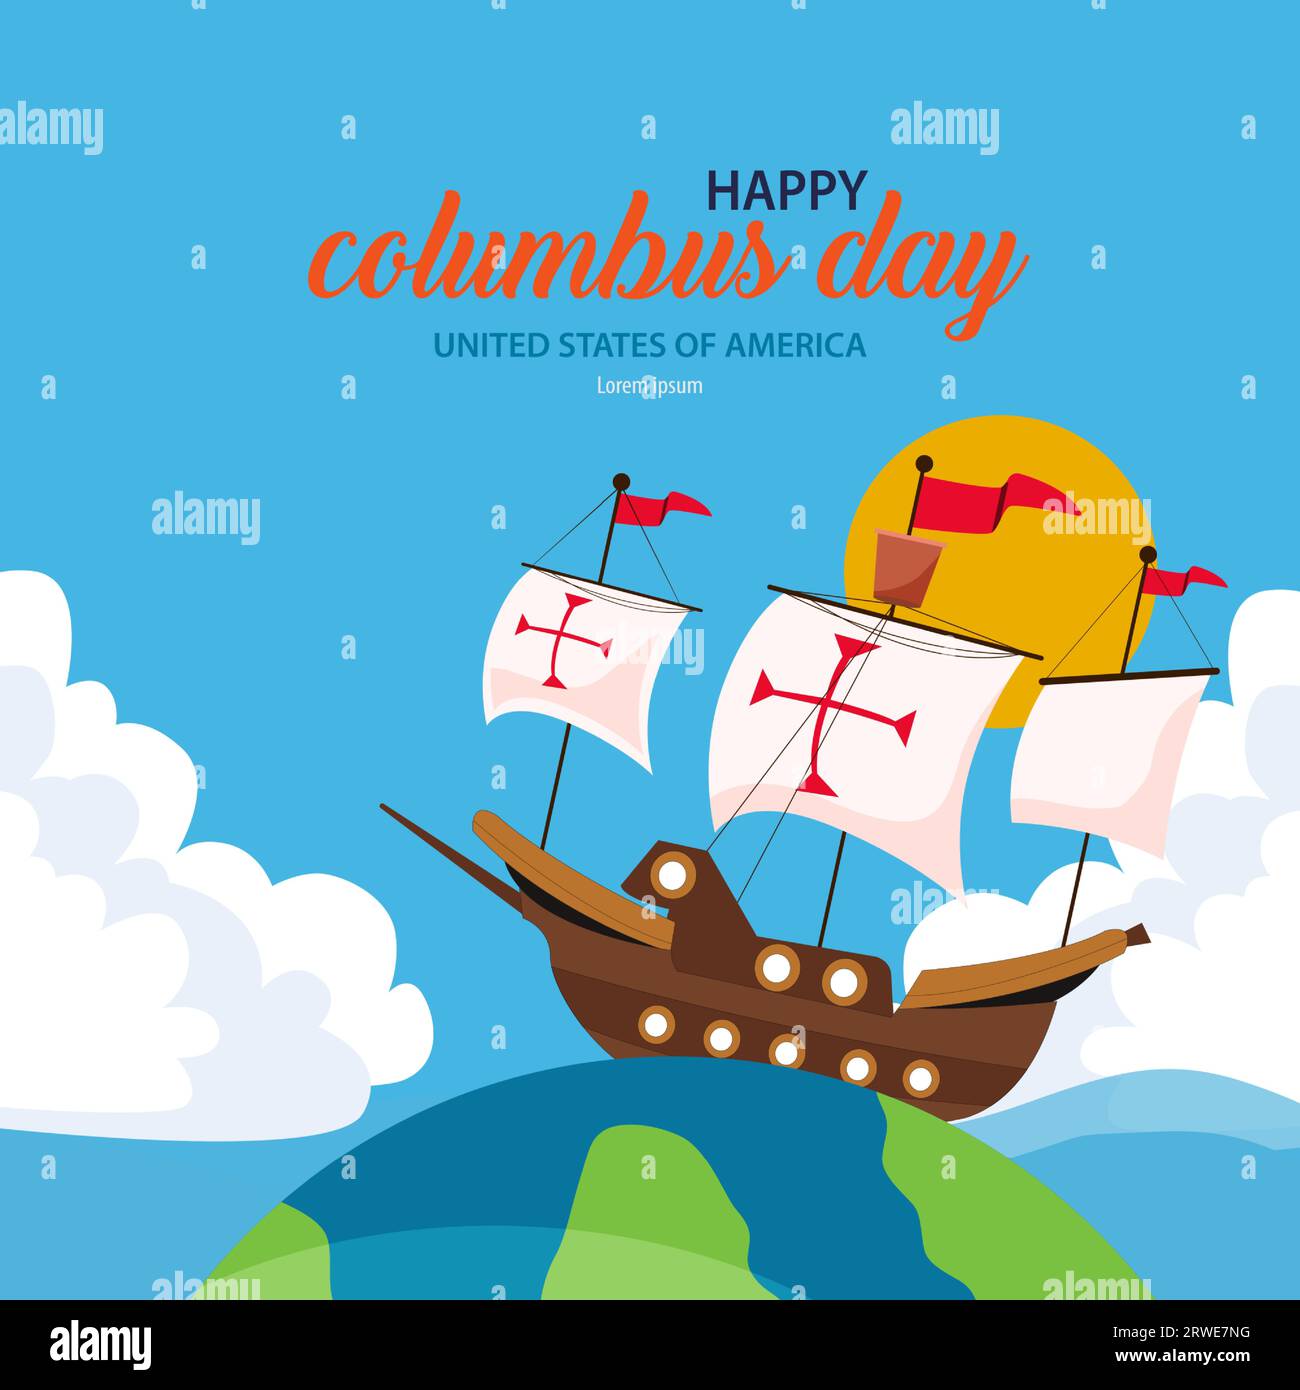 Columbus Day is a U.S. holiday that commemorates Christopher Columbus's arrival in the Americas in 1492. Stock Vector